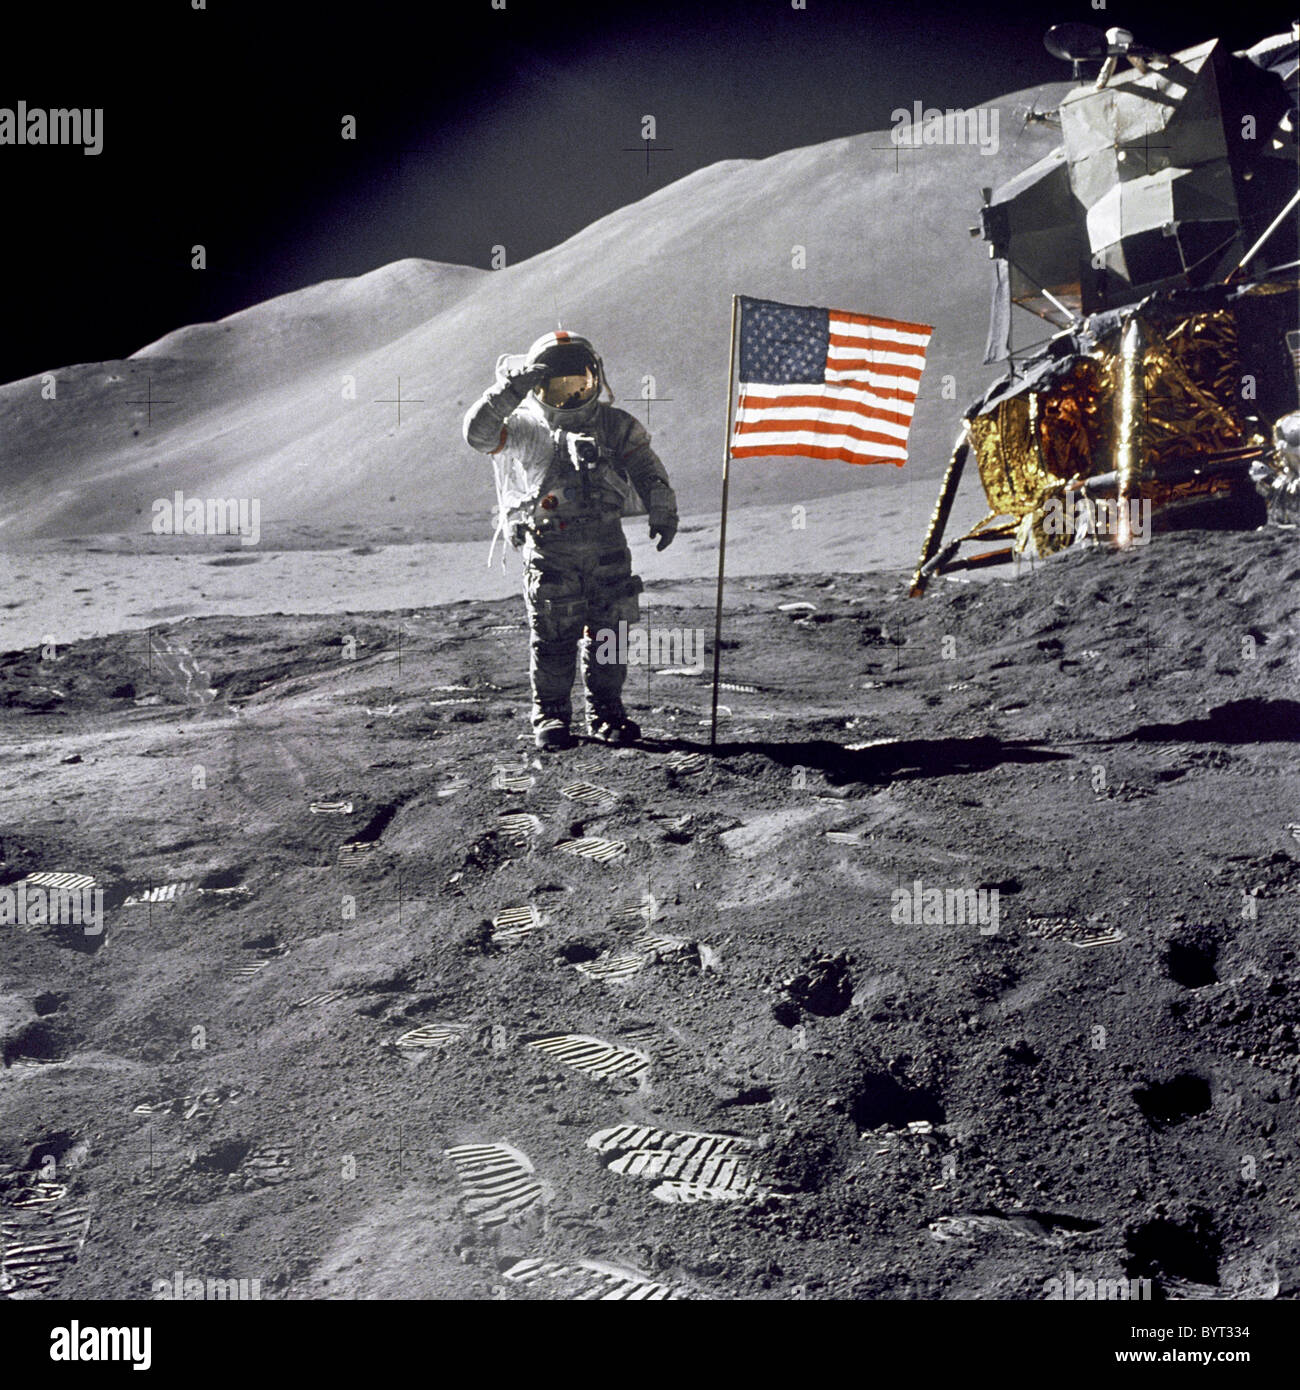 Astronaut David R. Scott salutes while standing beside the U.S. flag during the Apollo 15 mission. Stock Photo